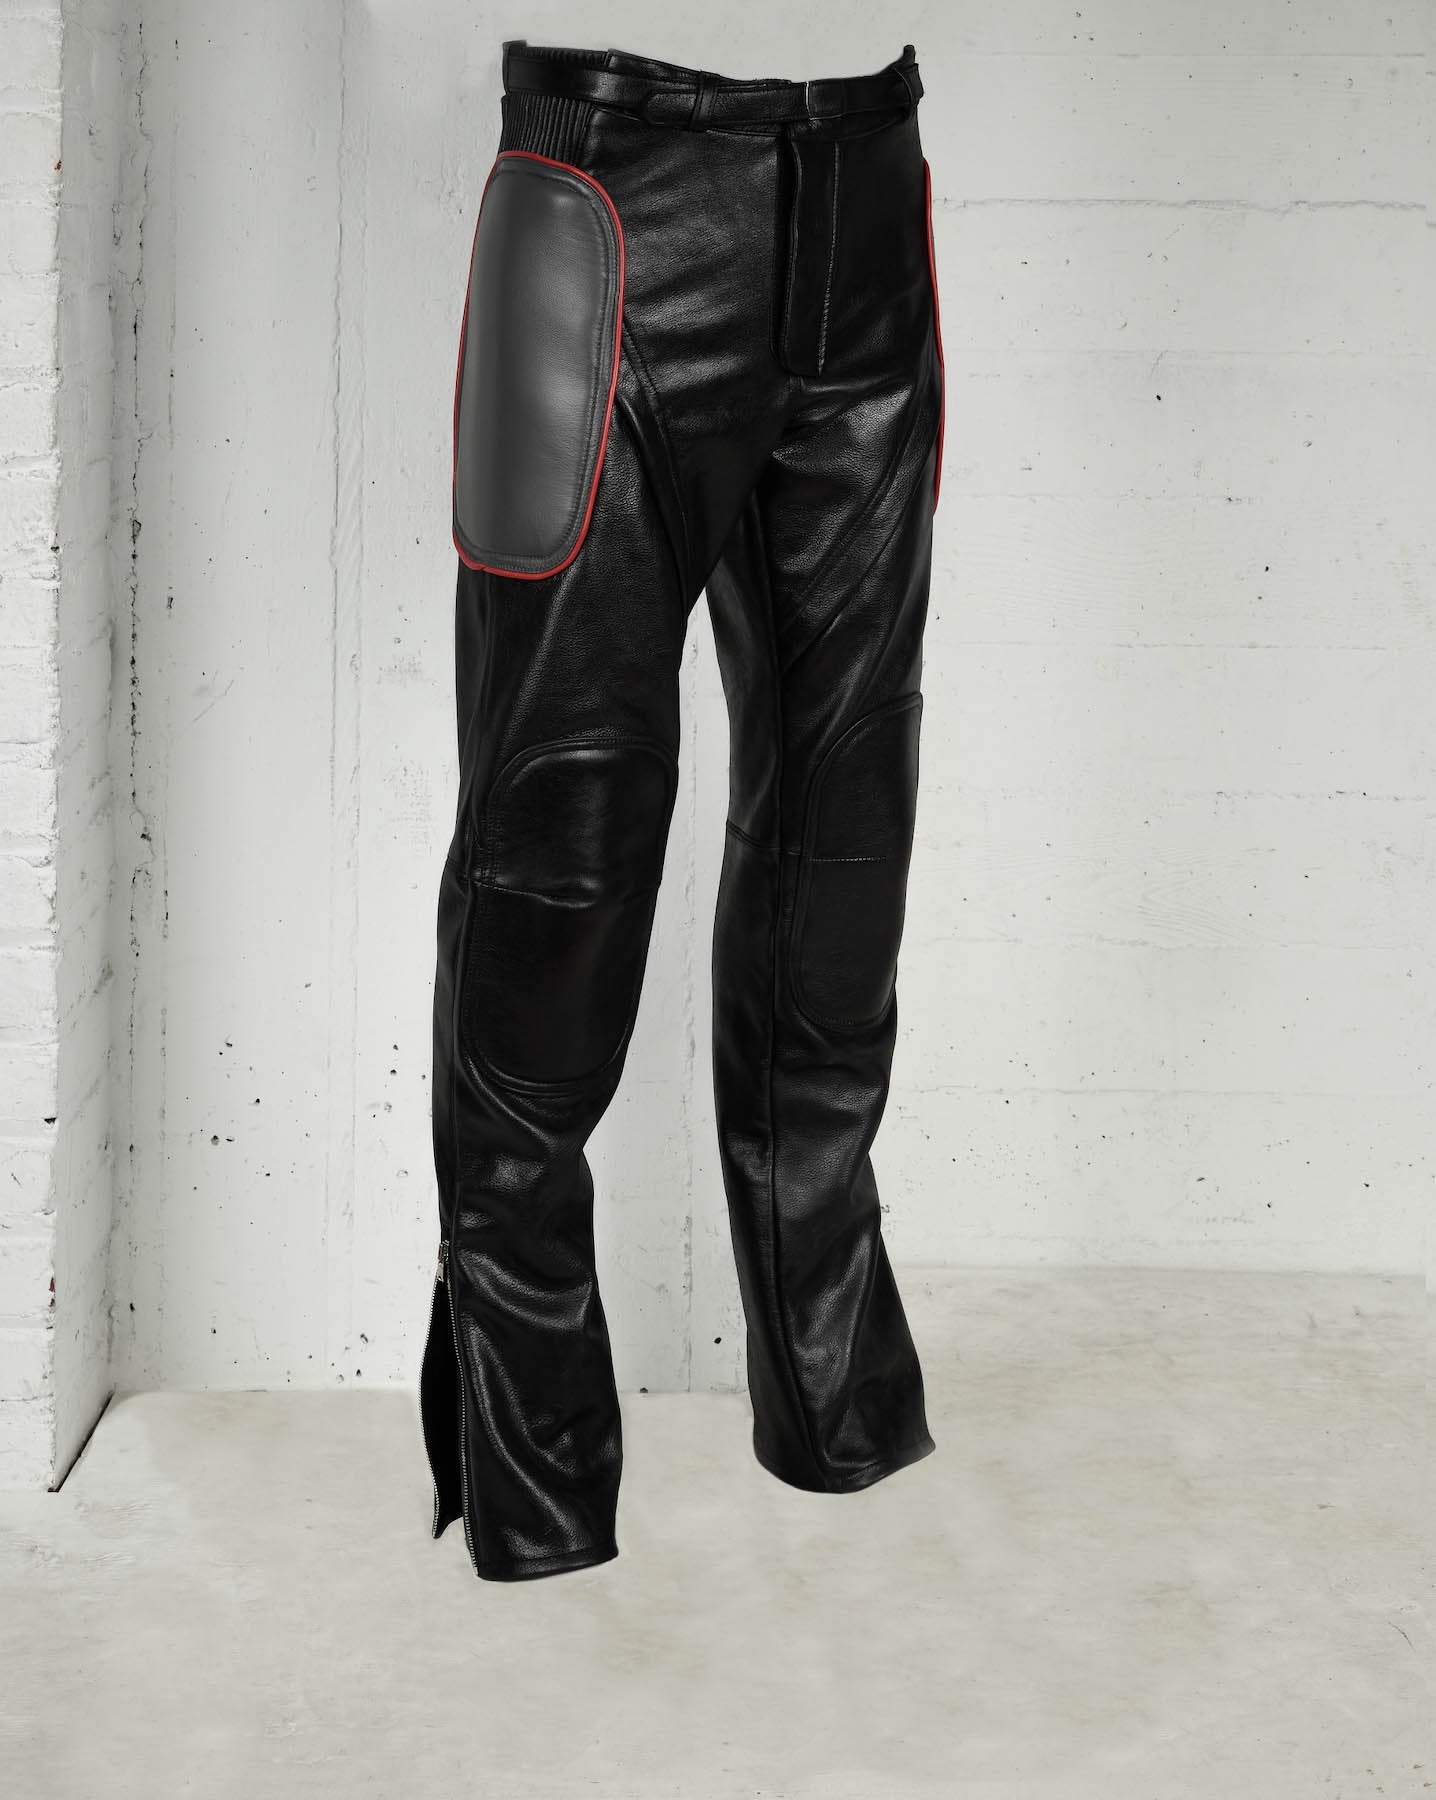 WEISE Hydra Waterproof Leather Motorcycle Riding Pants - FREE USA DELIVERY  – TourandTrack.com